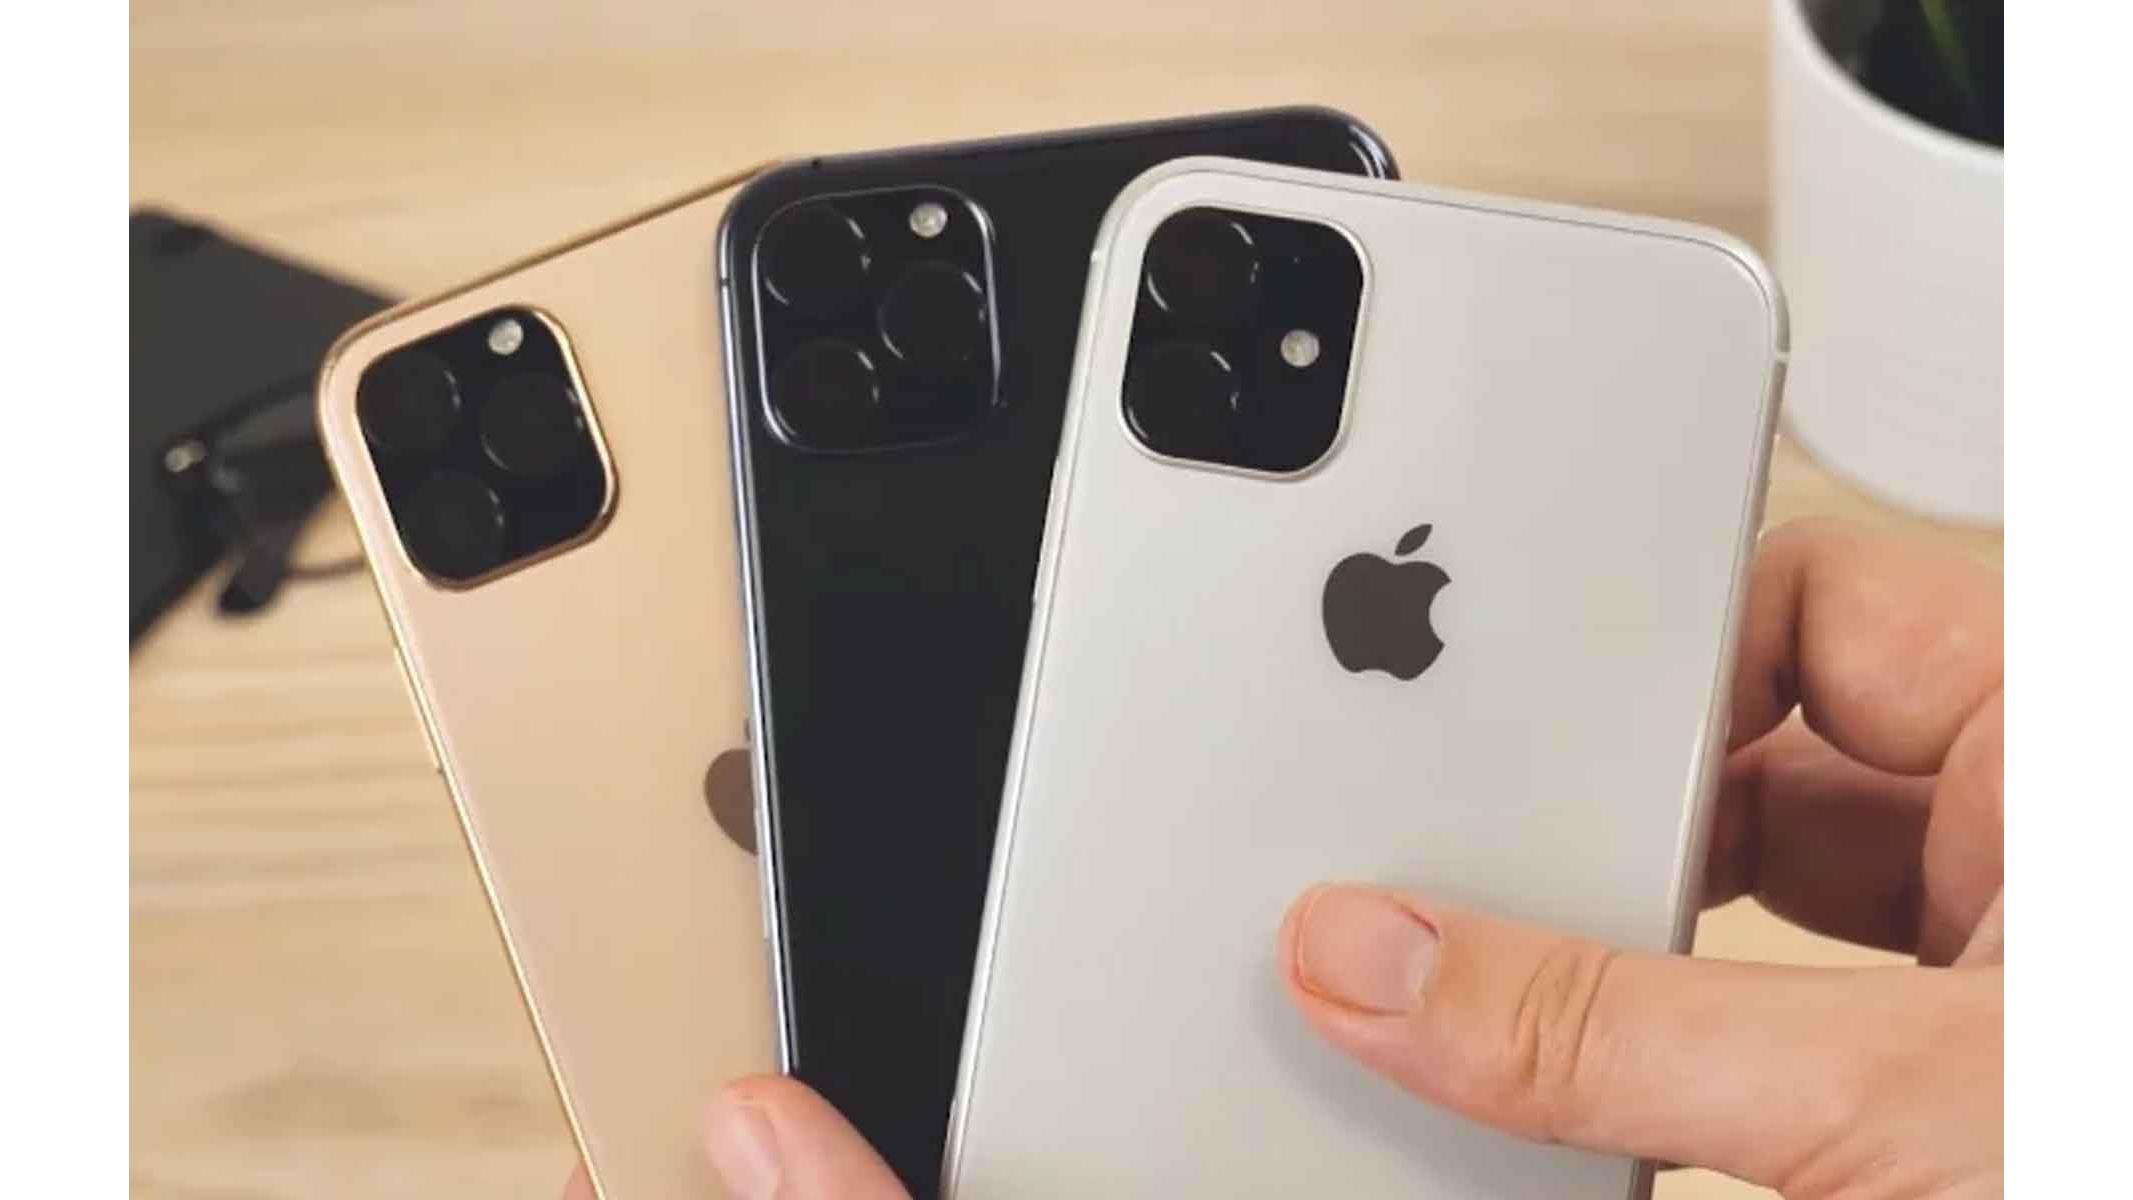 Apple May Use Iphone Pro Branding For 2019 Models Launching In